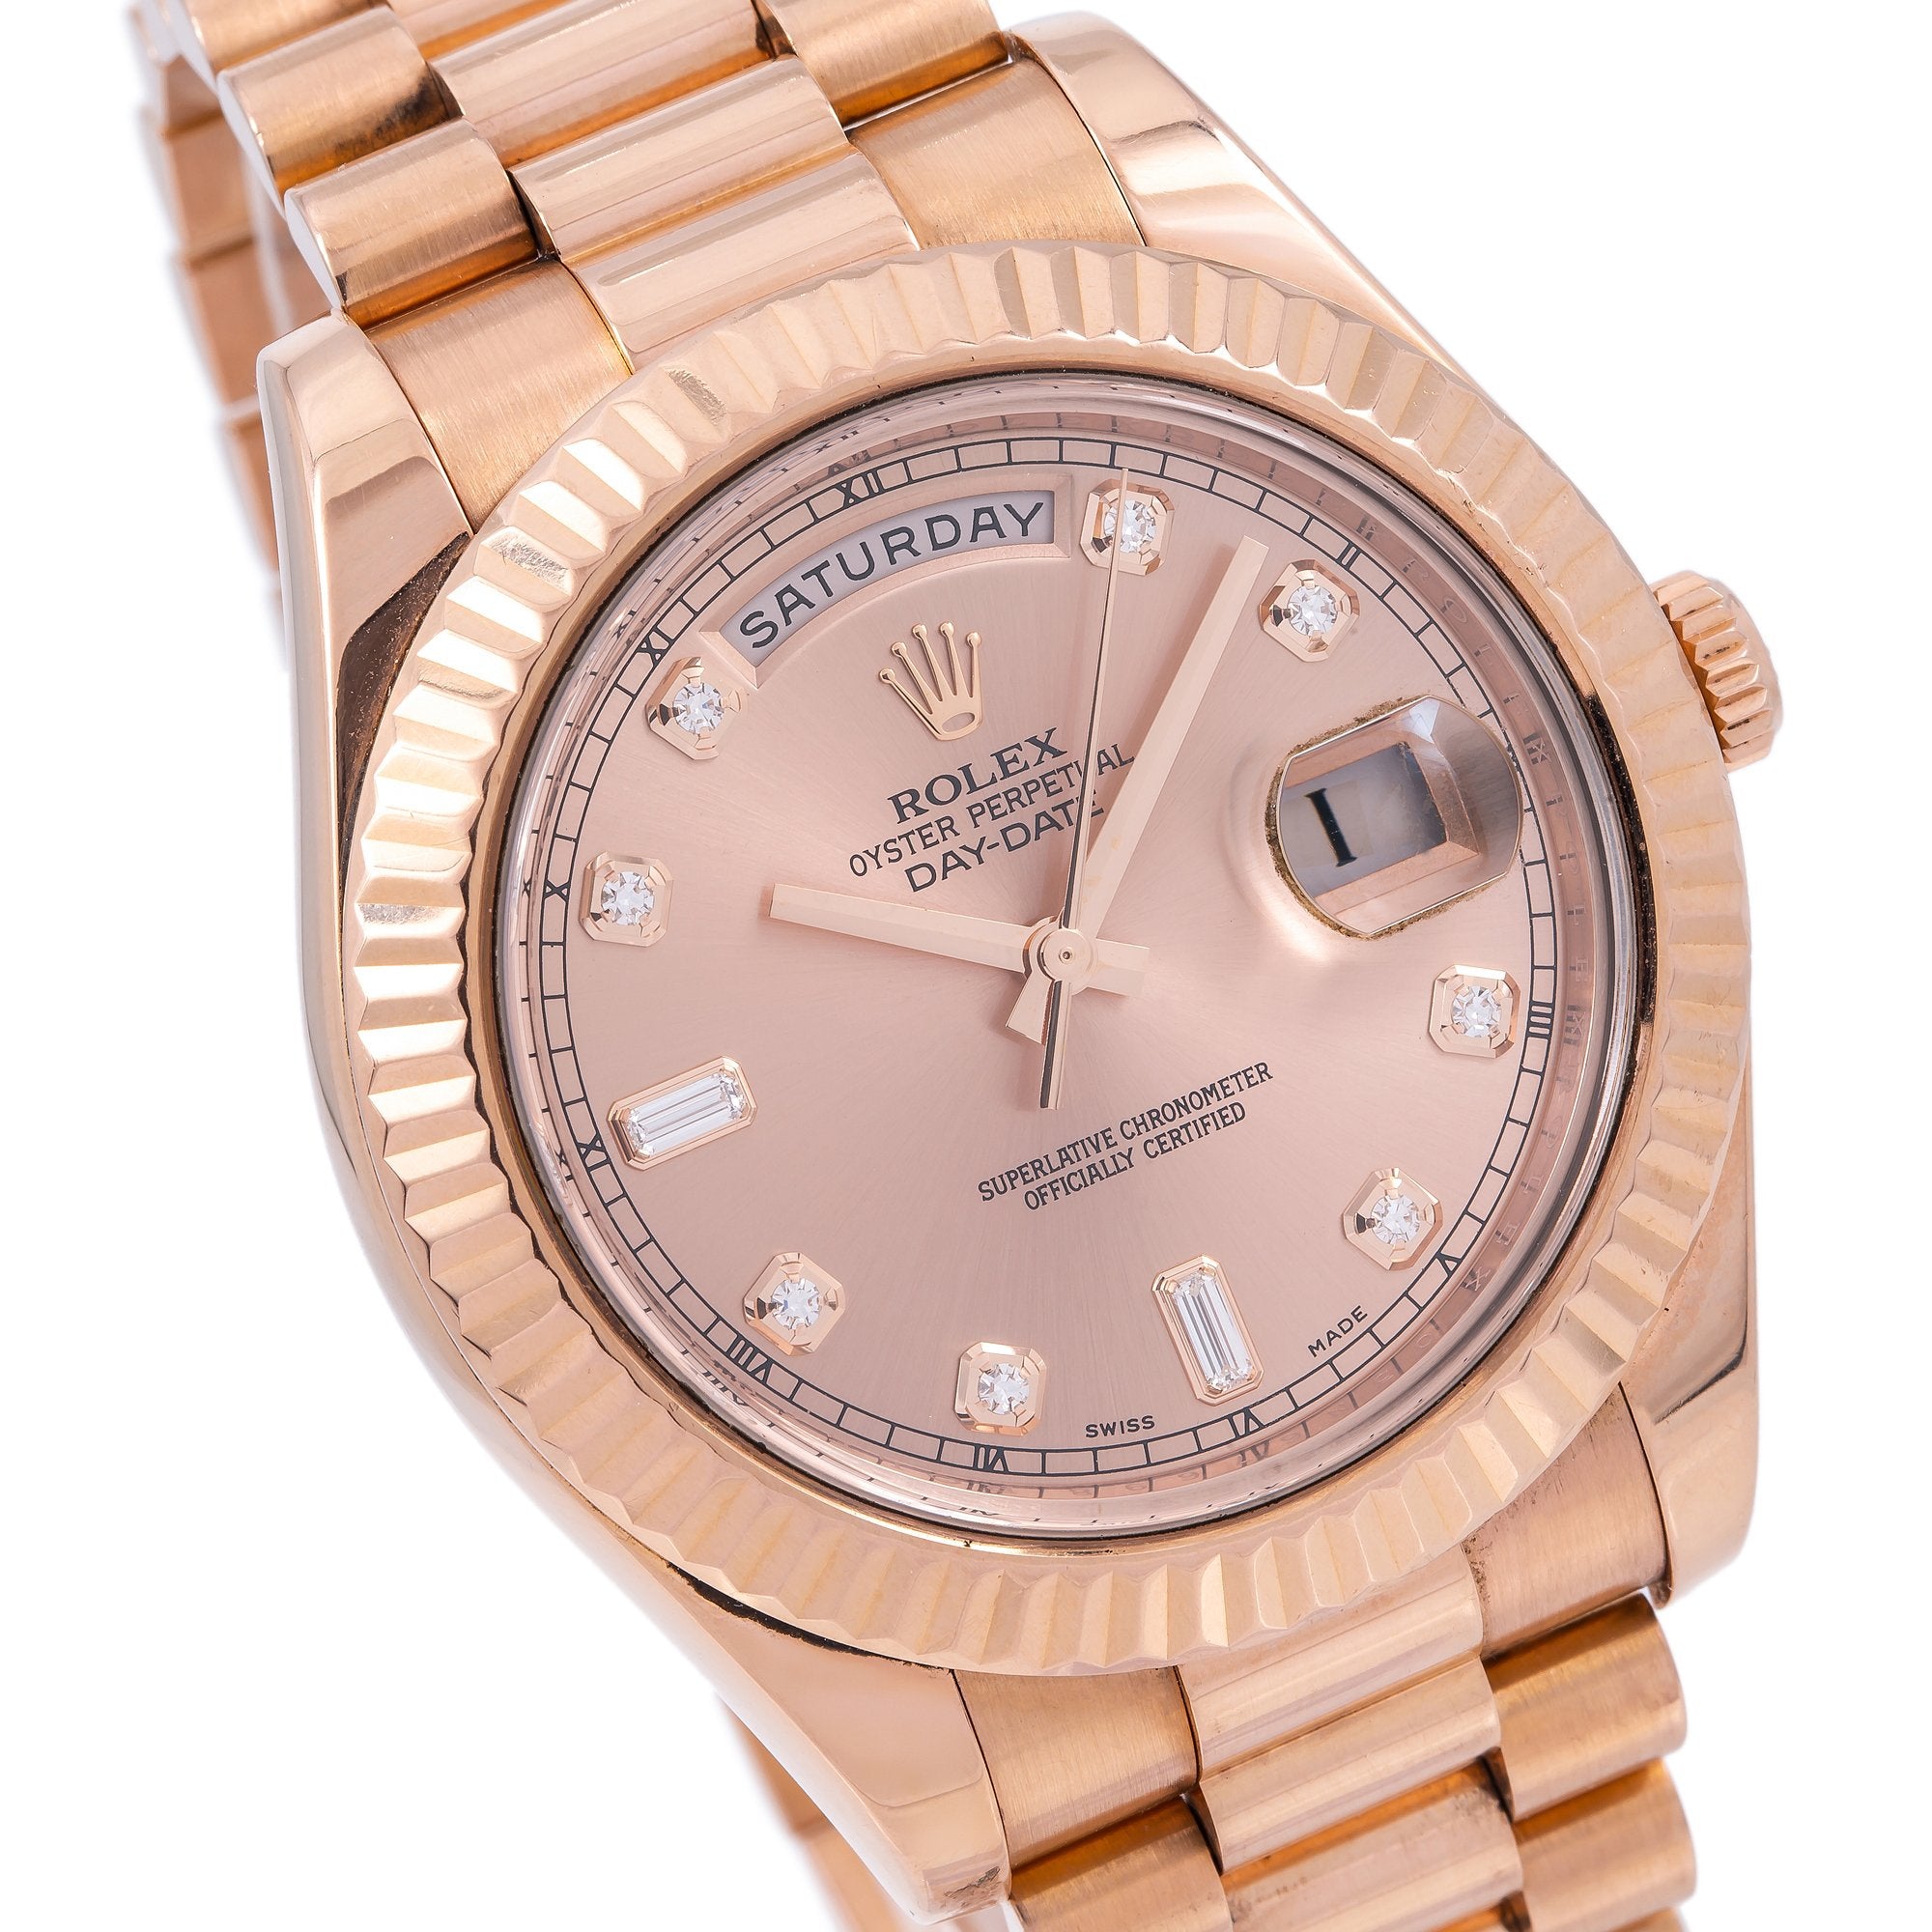 41mm rose gold day date